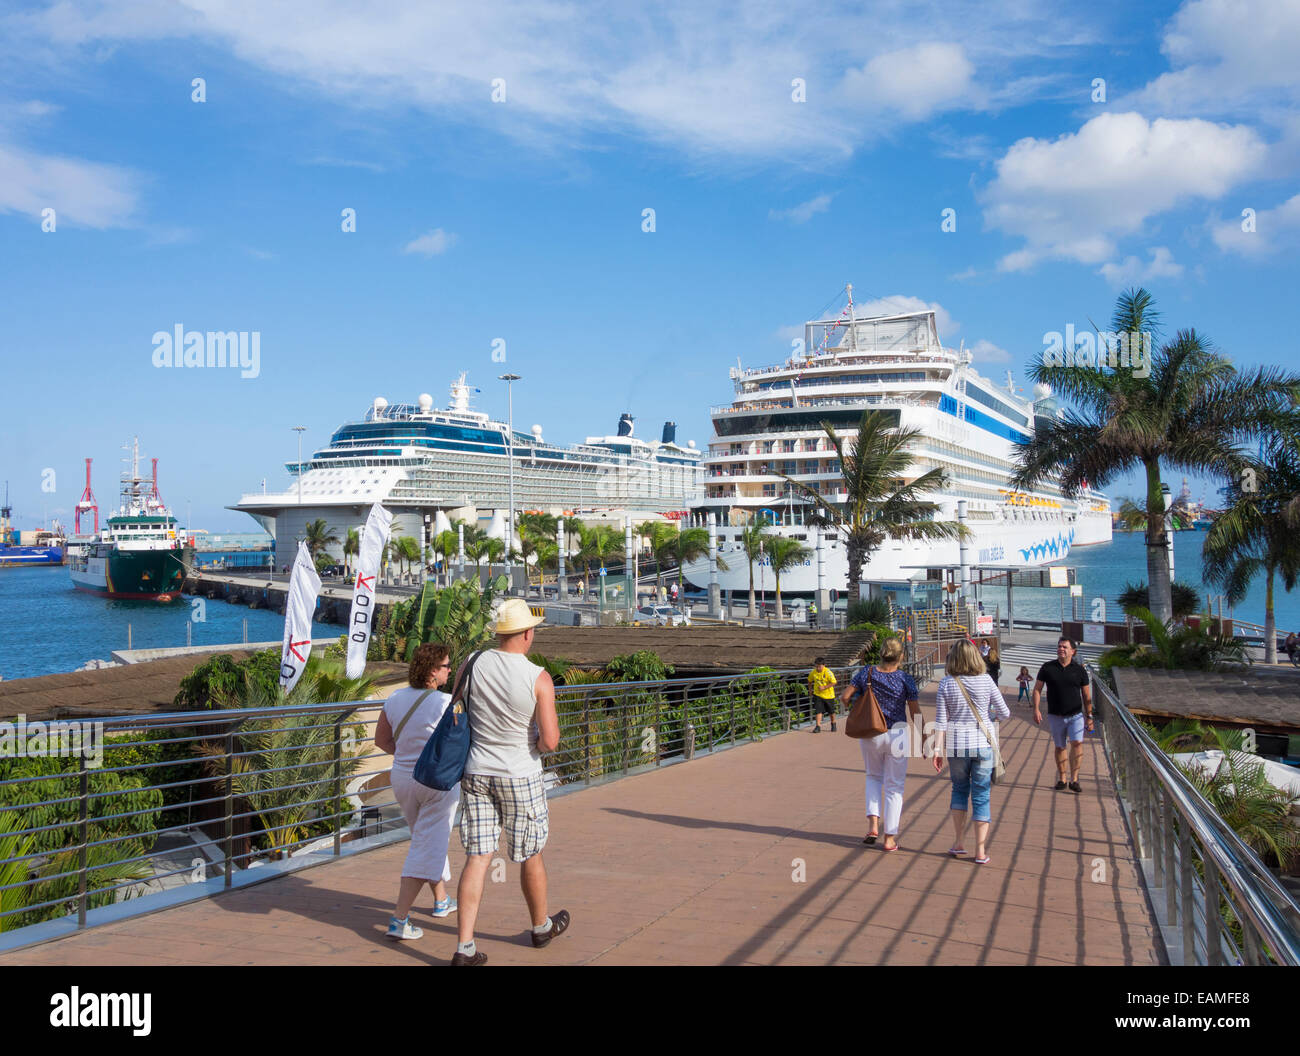 View of cruise ships in Las palmas port from nearby shopping mall. Gran  Canaria, Canary Islands, Spain Stock Photo - Alamy